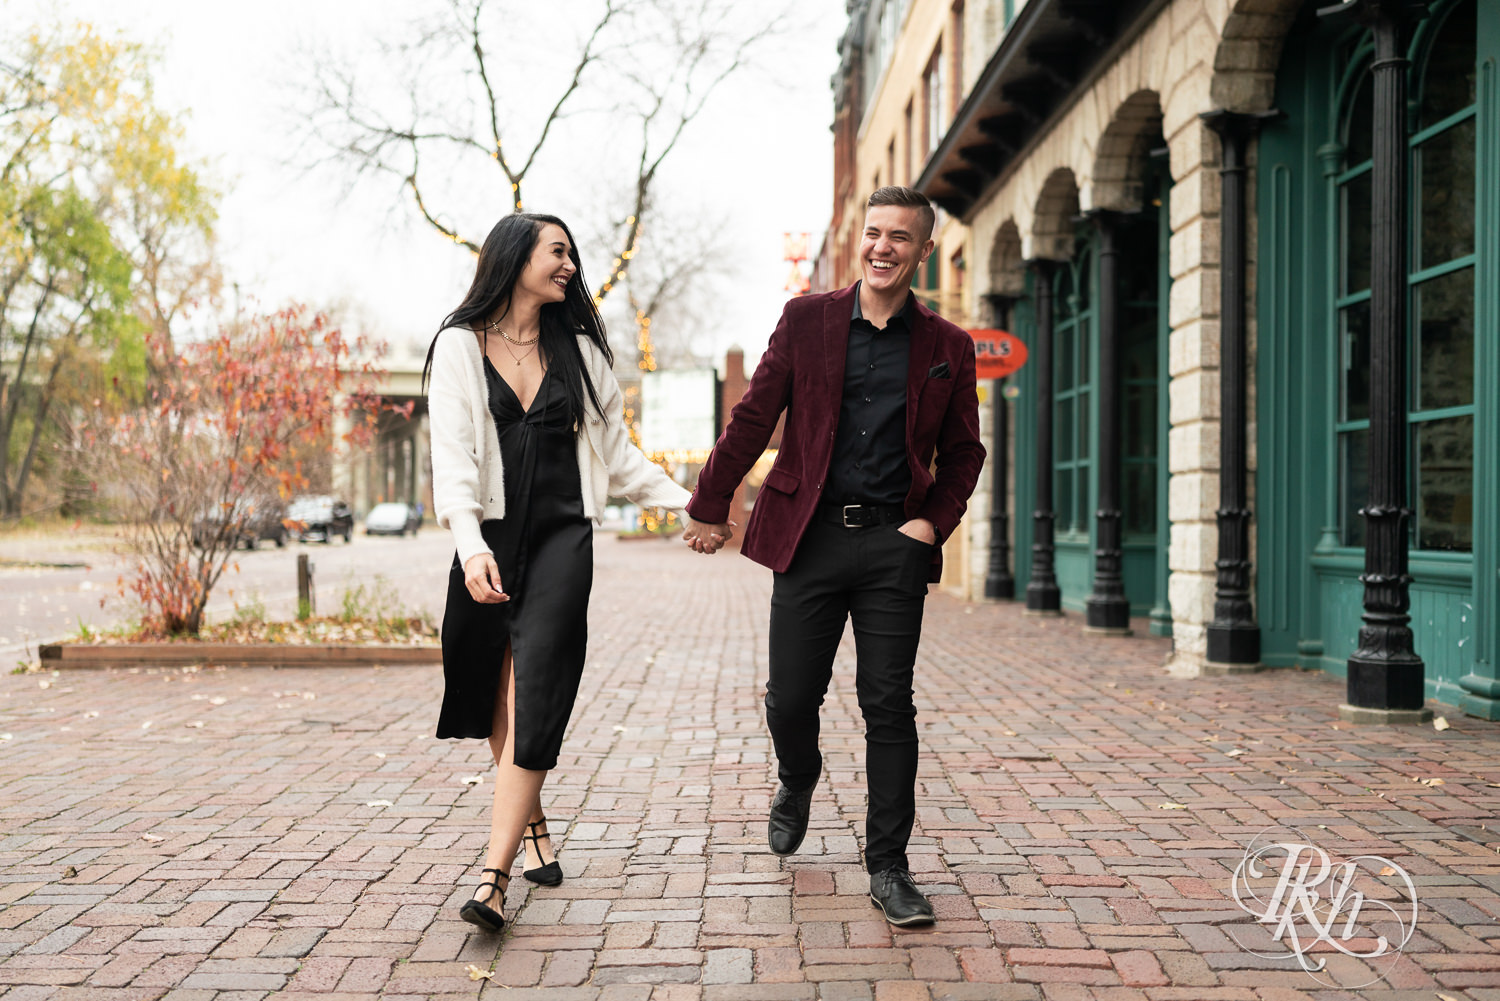 Man in black clothes and burgundy jacket and woman in black dress walk holding hands during engagement photography in Minneapolis, Minnesota.